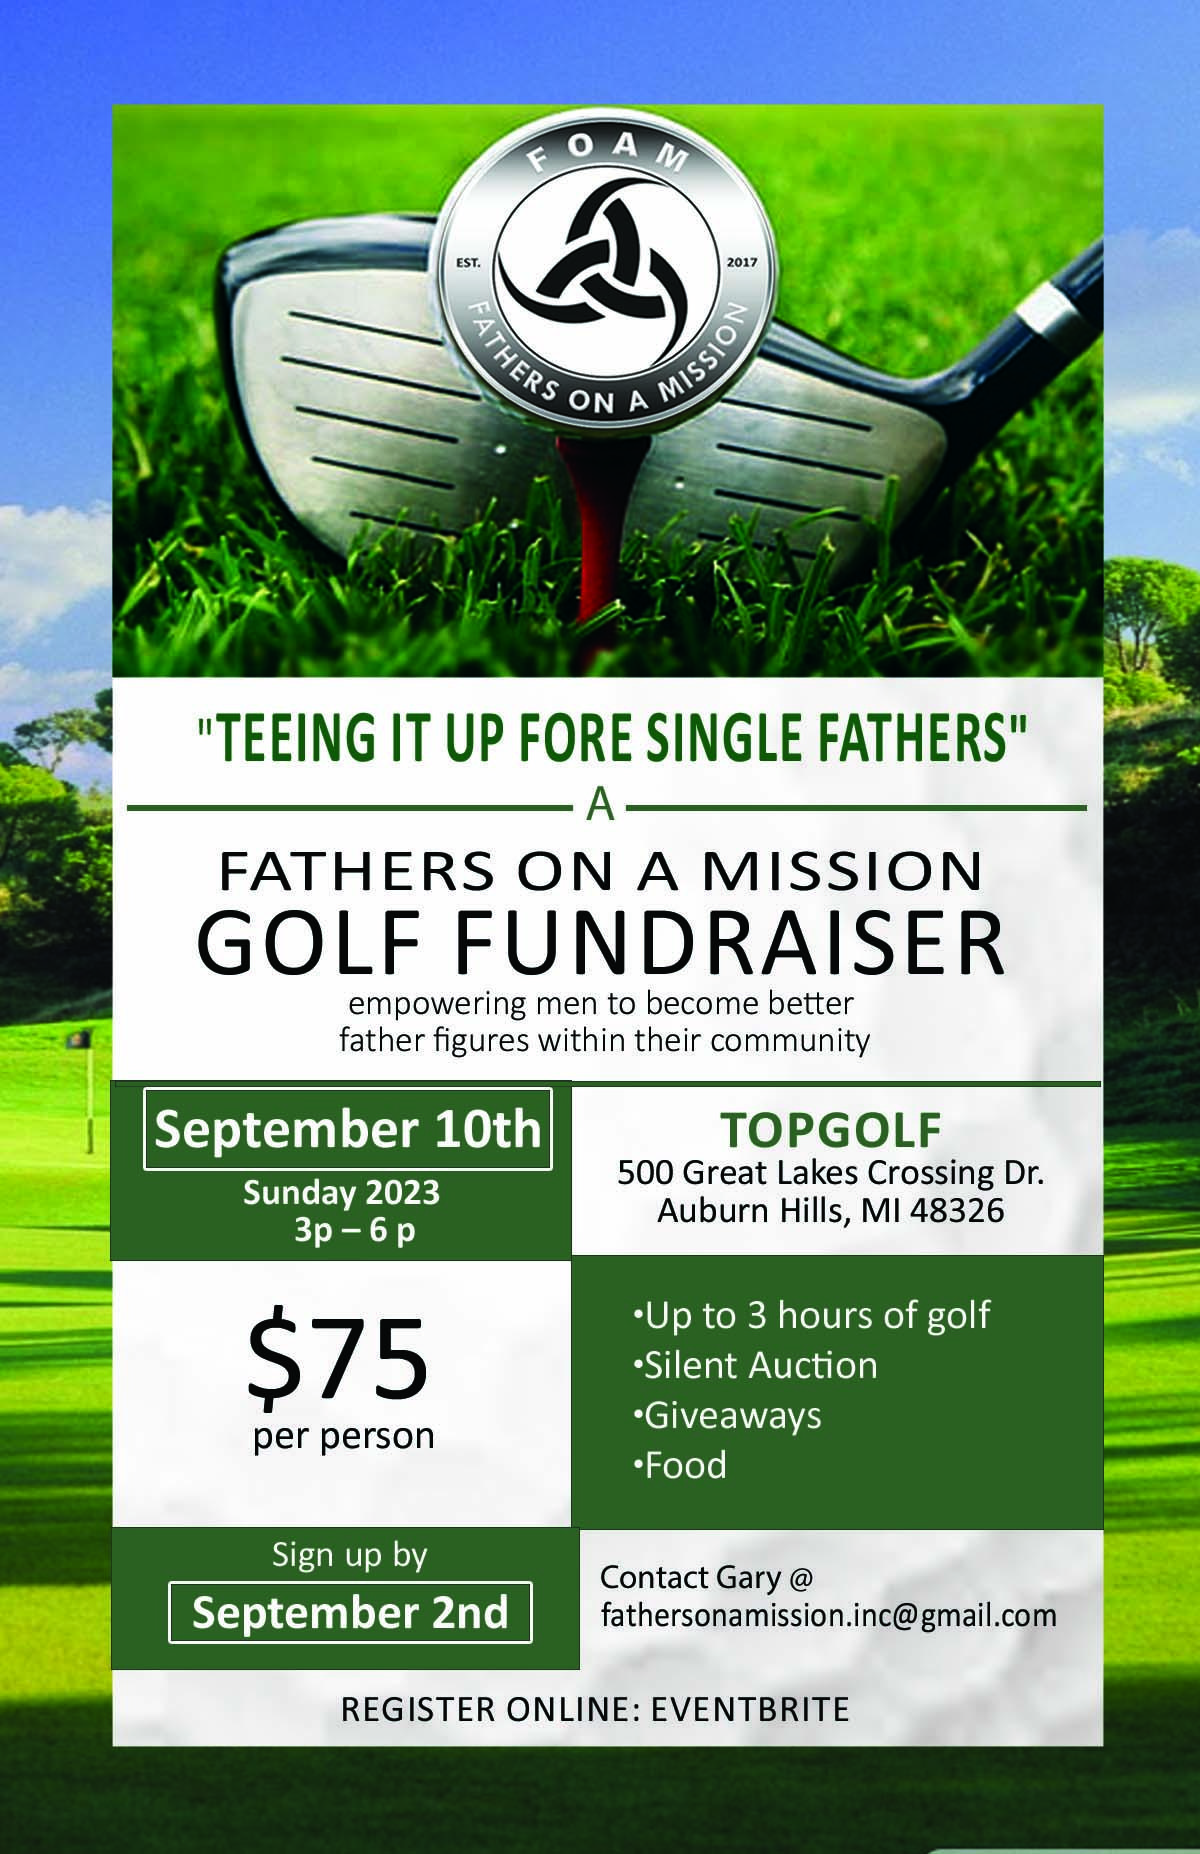 "TEEING IT UP FORE SINGLE FATHERS"